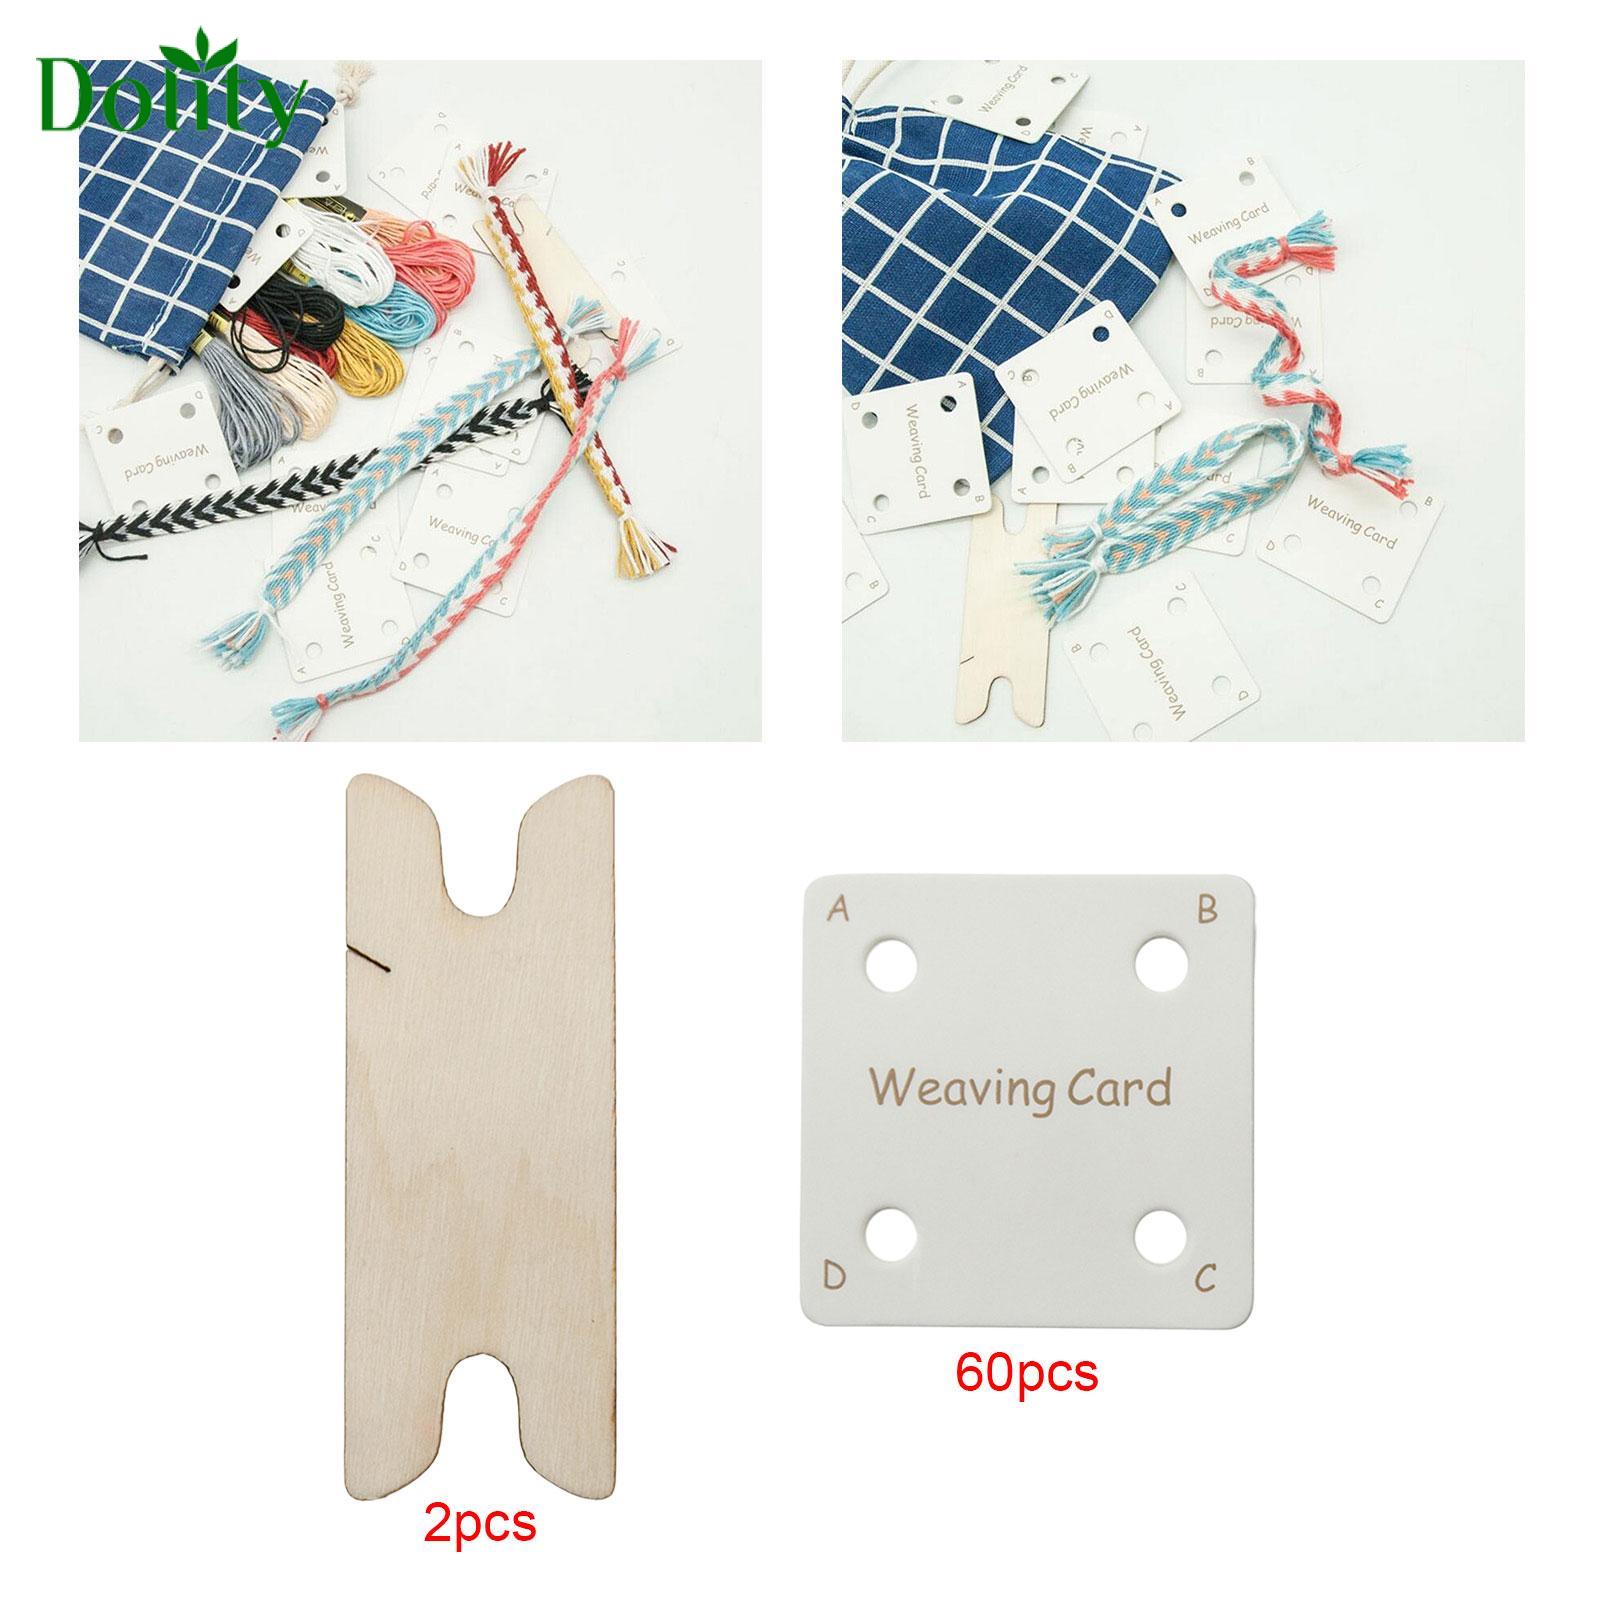 Dolity 60 Pieces Tablet Weaving Card for Loom or Loom DIY Sewing